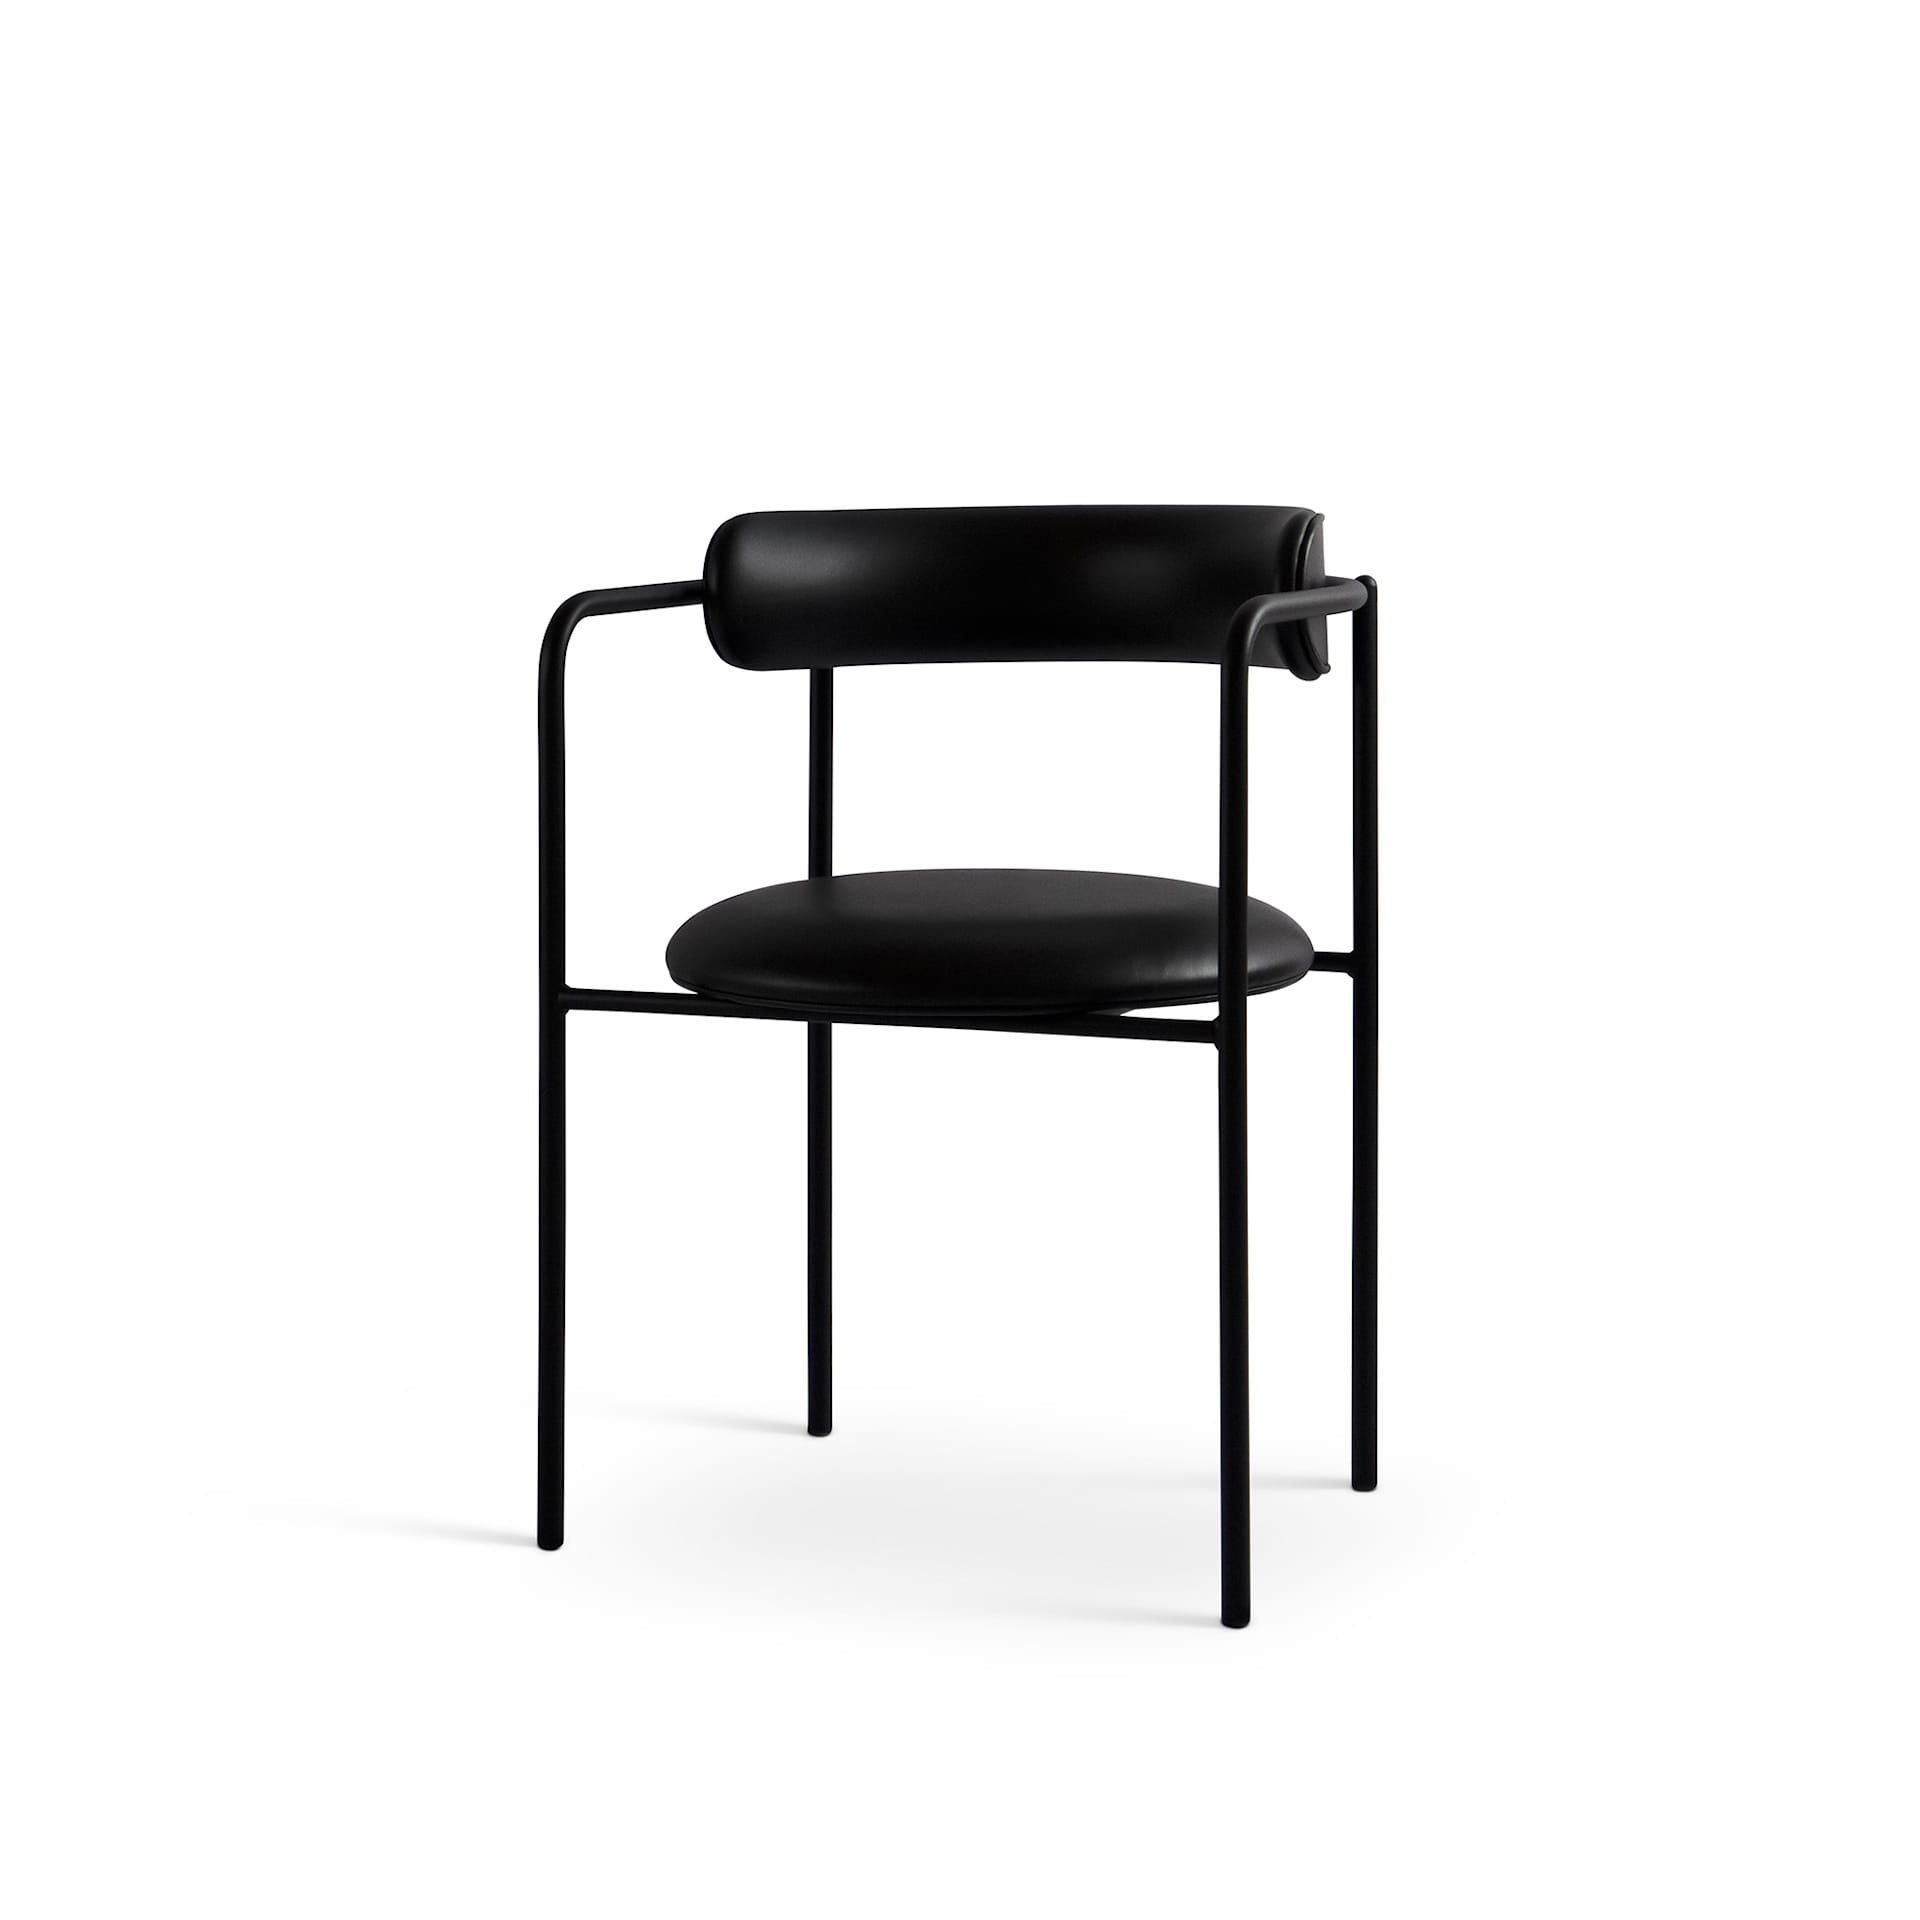 FF Chair Rounded Black Legs - Friends & Founders - NO GA